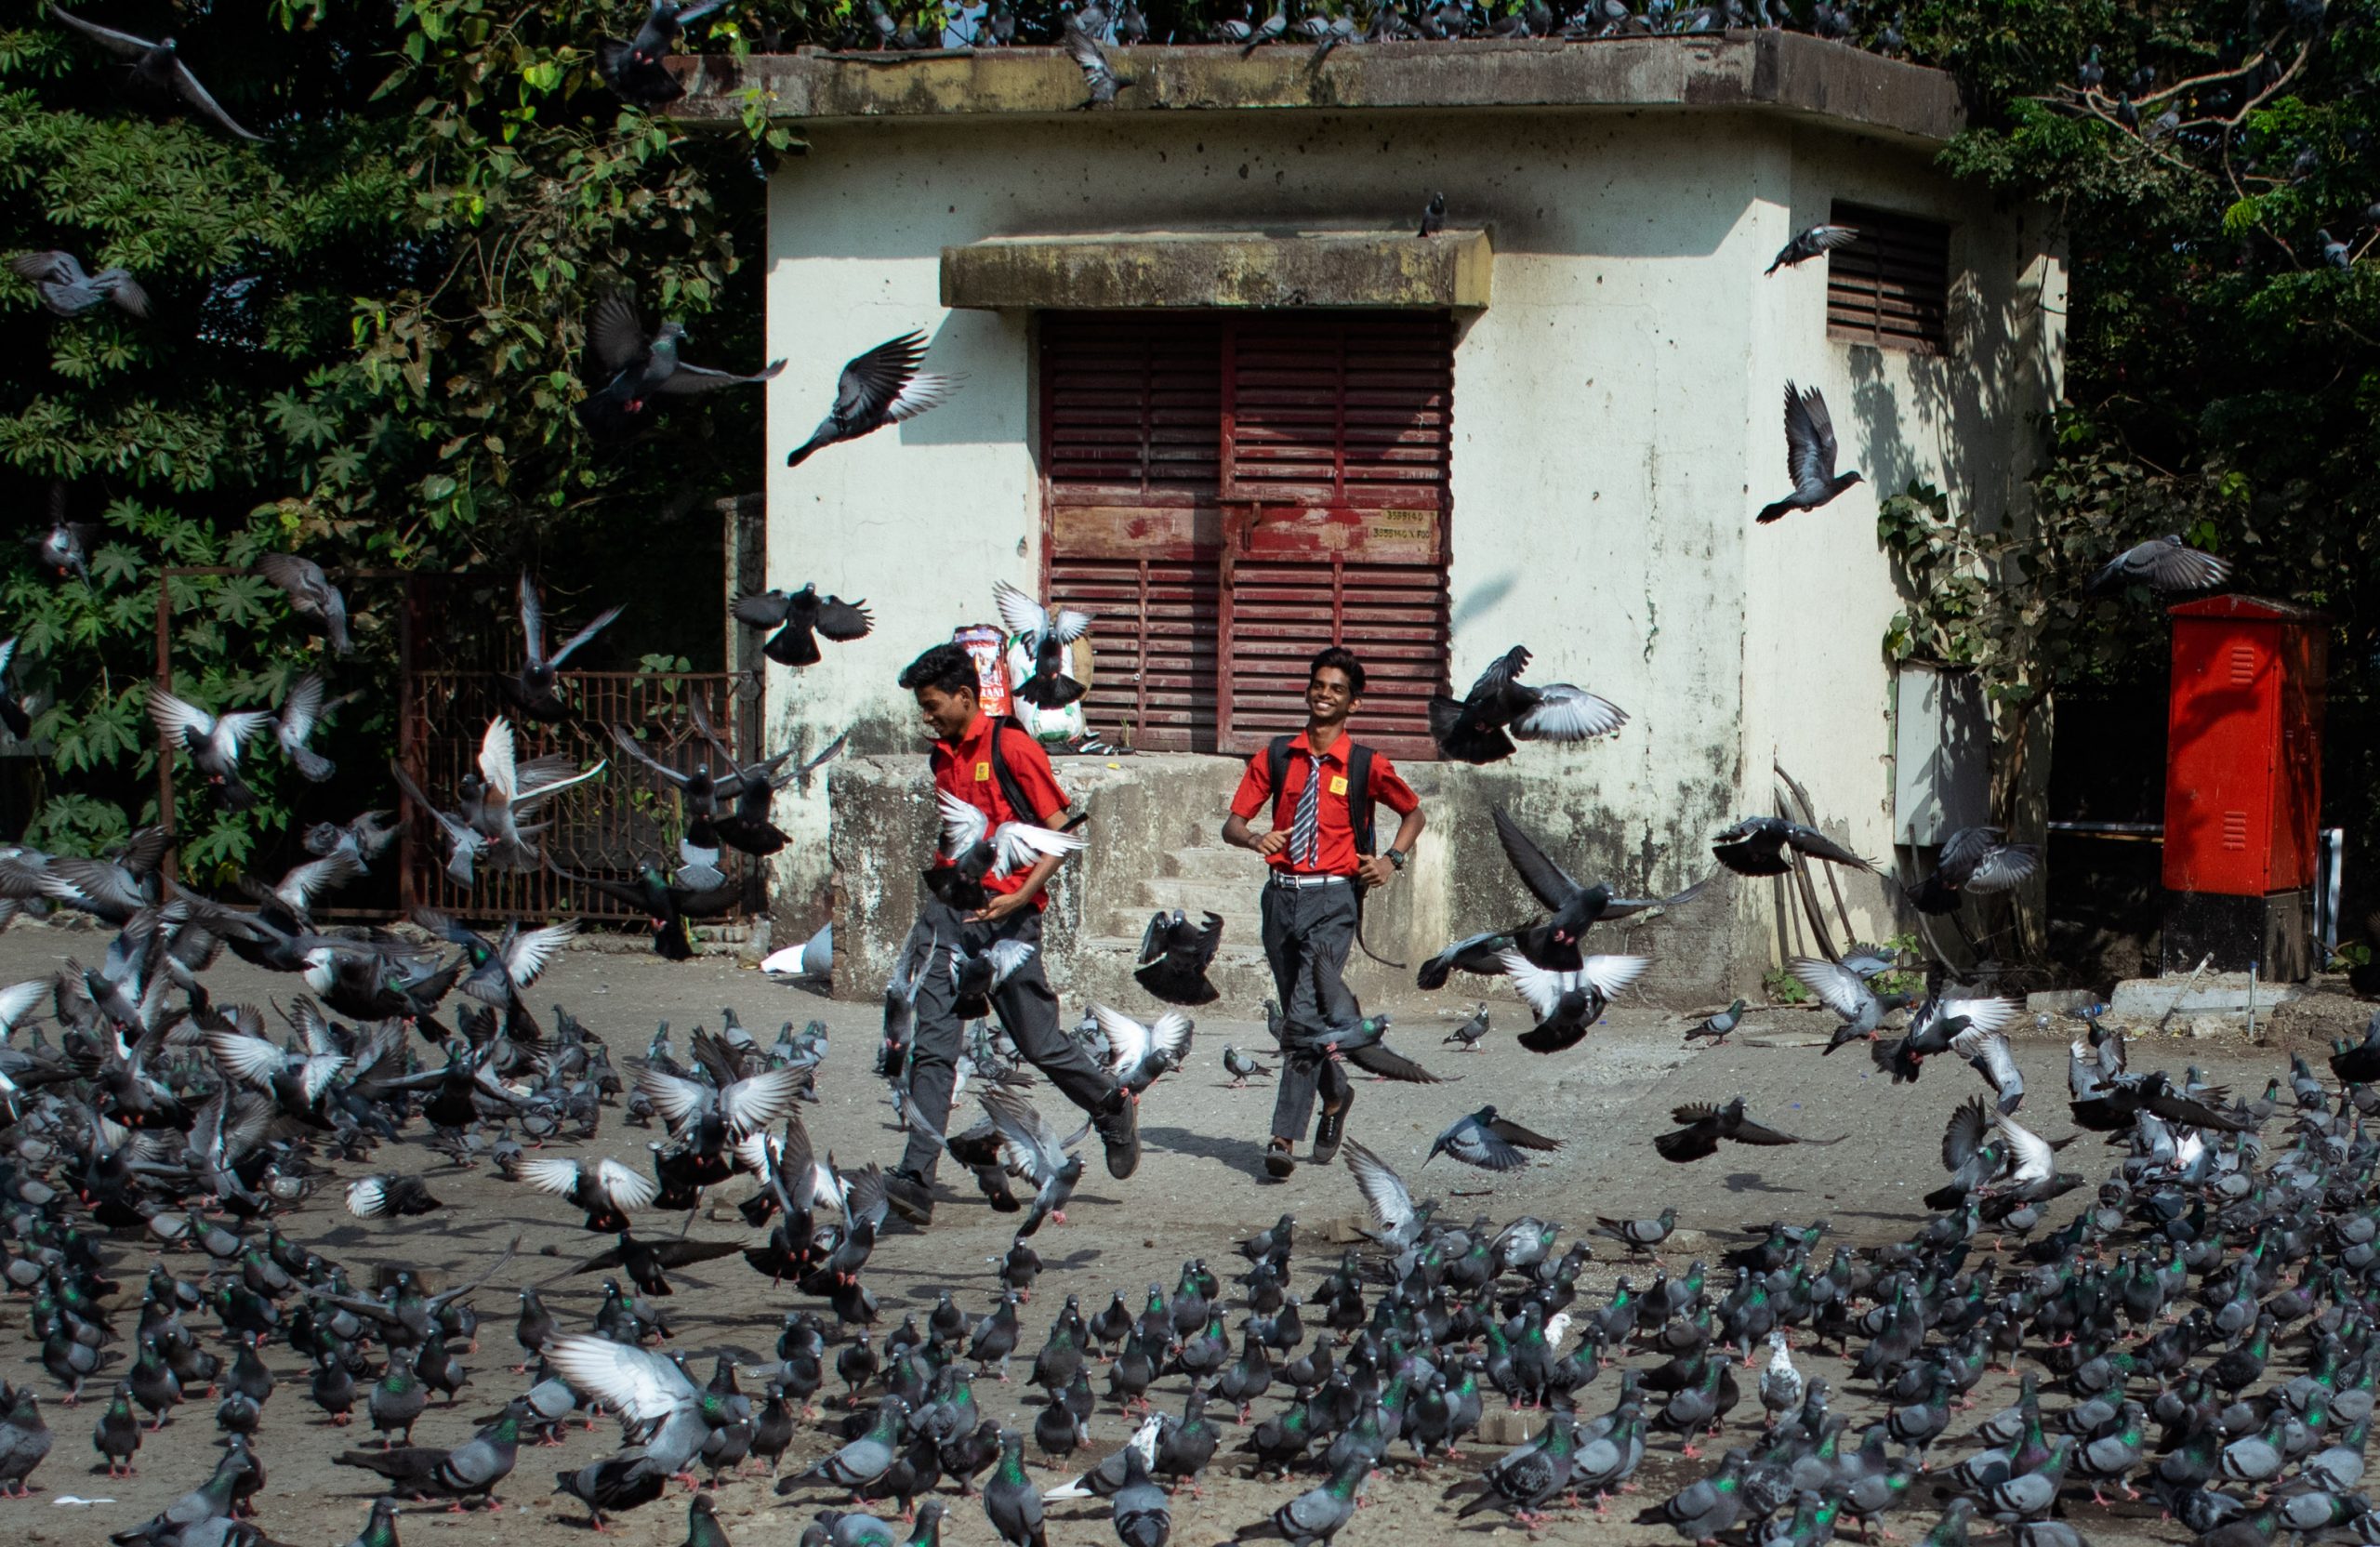 boys running amidst a flock of pigeons